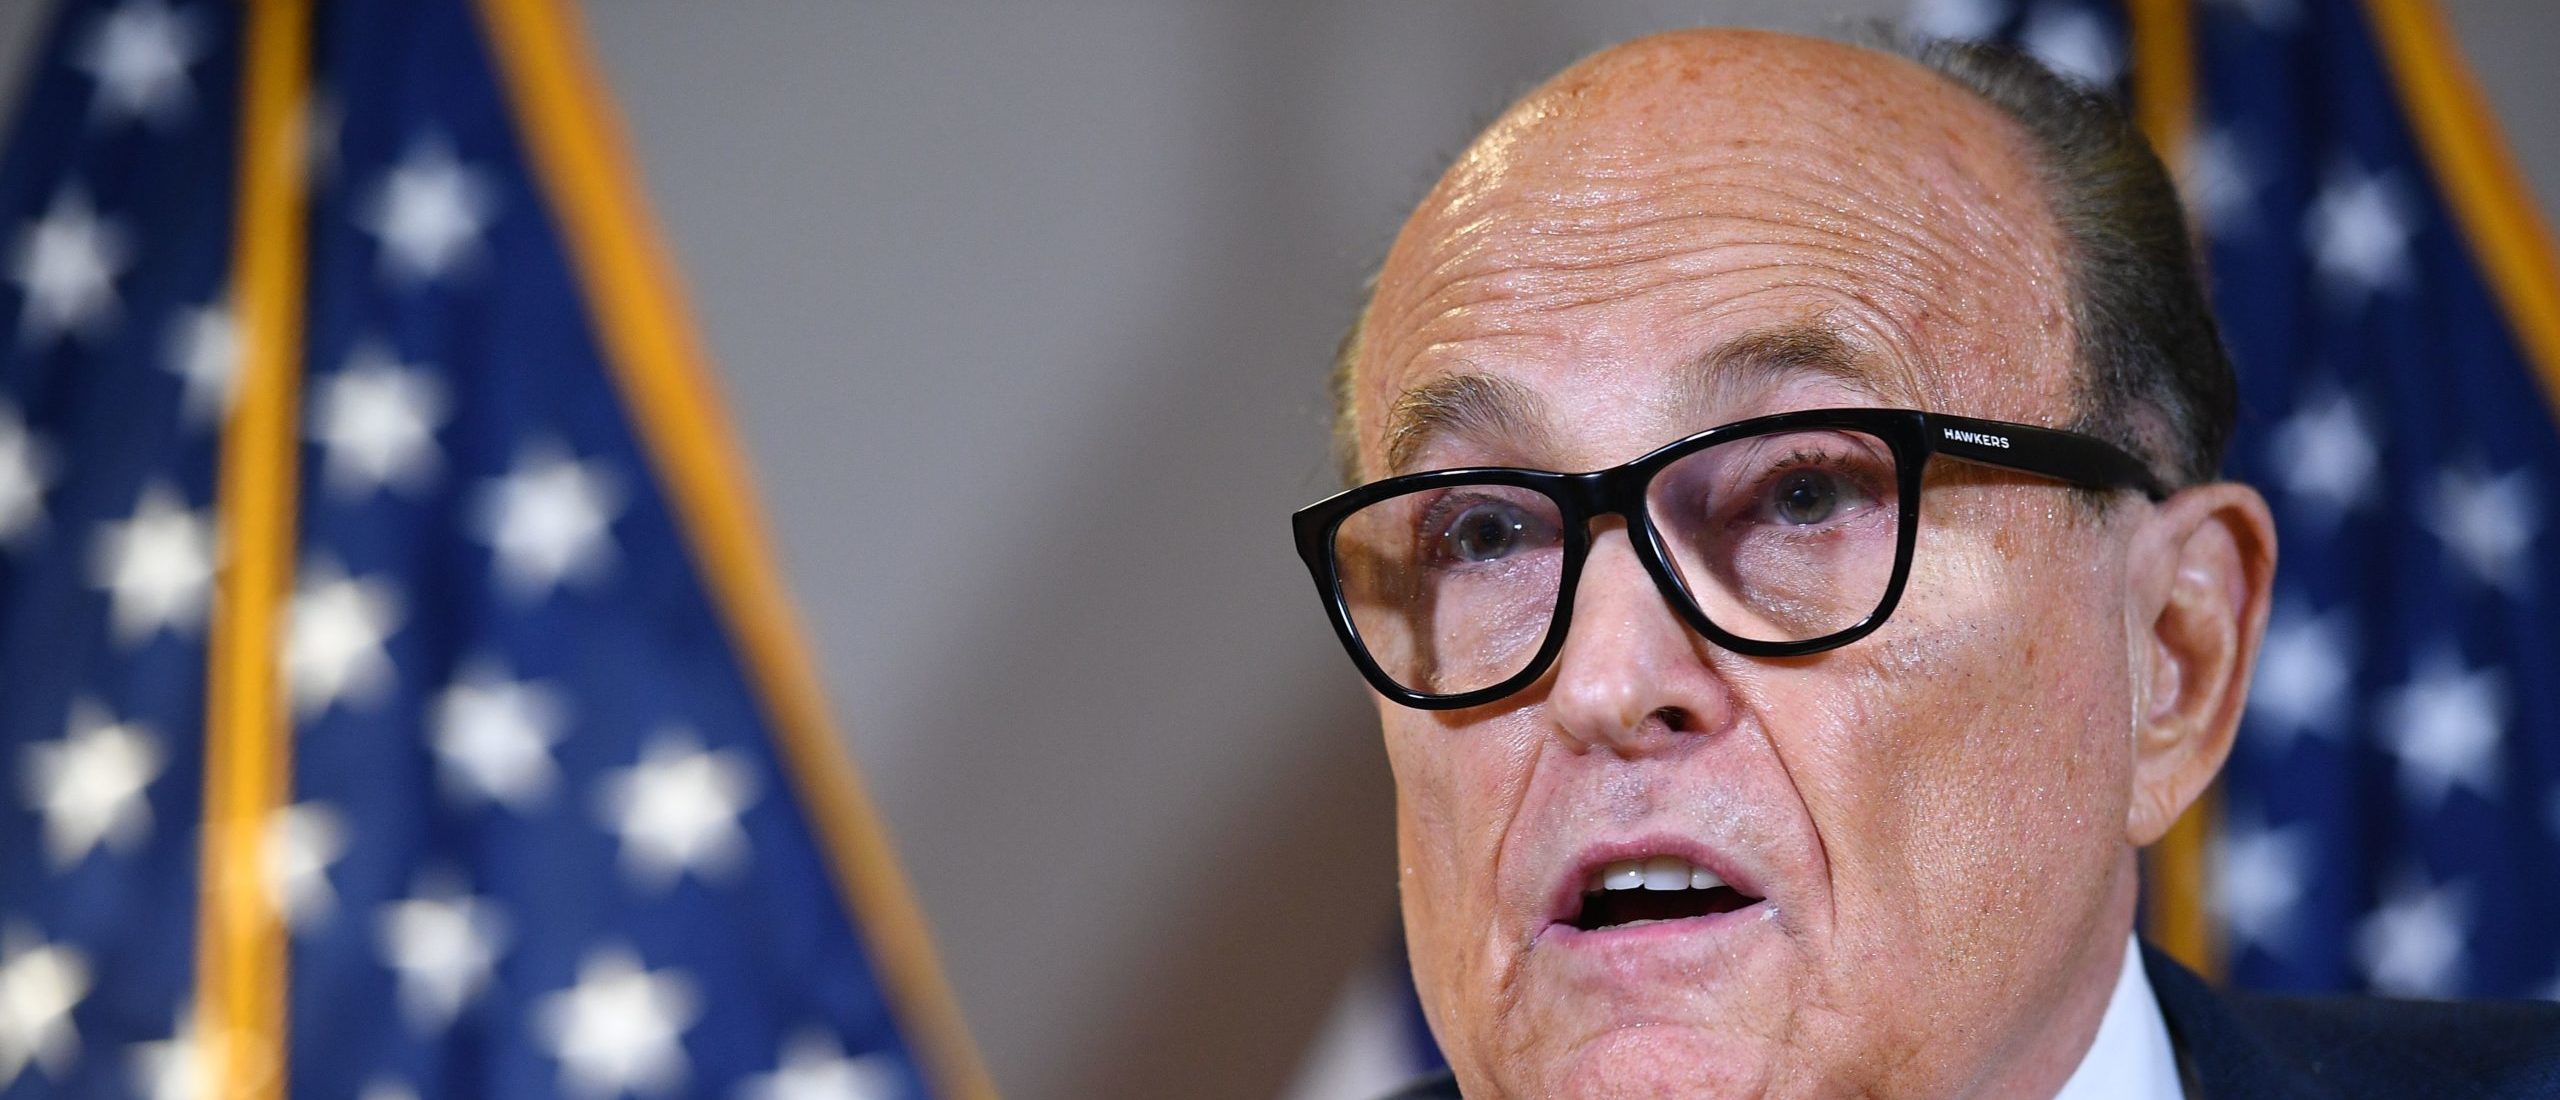 Trump's personal lawyer Rudy Giuliani speaks during a press conference at the Republican National Committee headquarters in Washington, DC, on November 19, 2020. (Photo by MANDEL NGAN / AFP) (Photo by MANDEL NGAN/AFP via Getty Images)